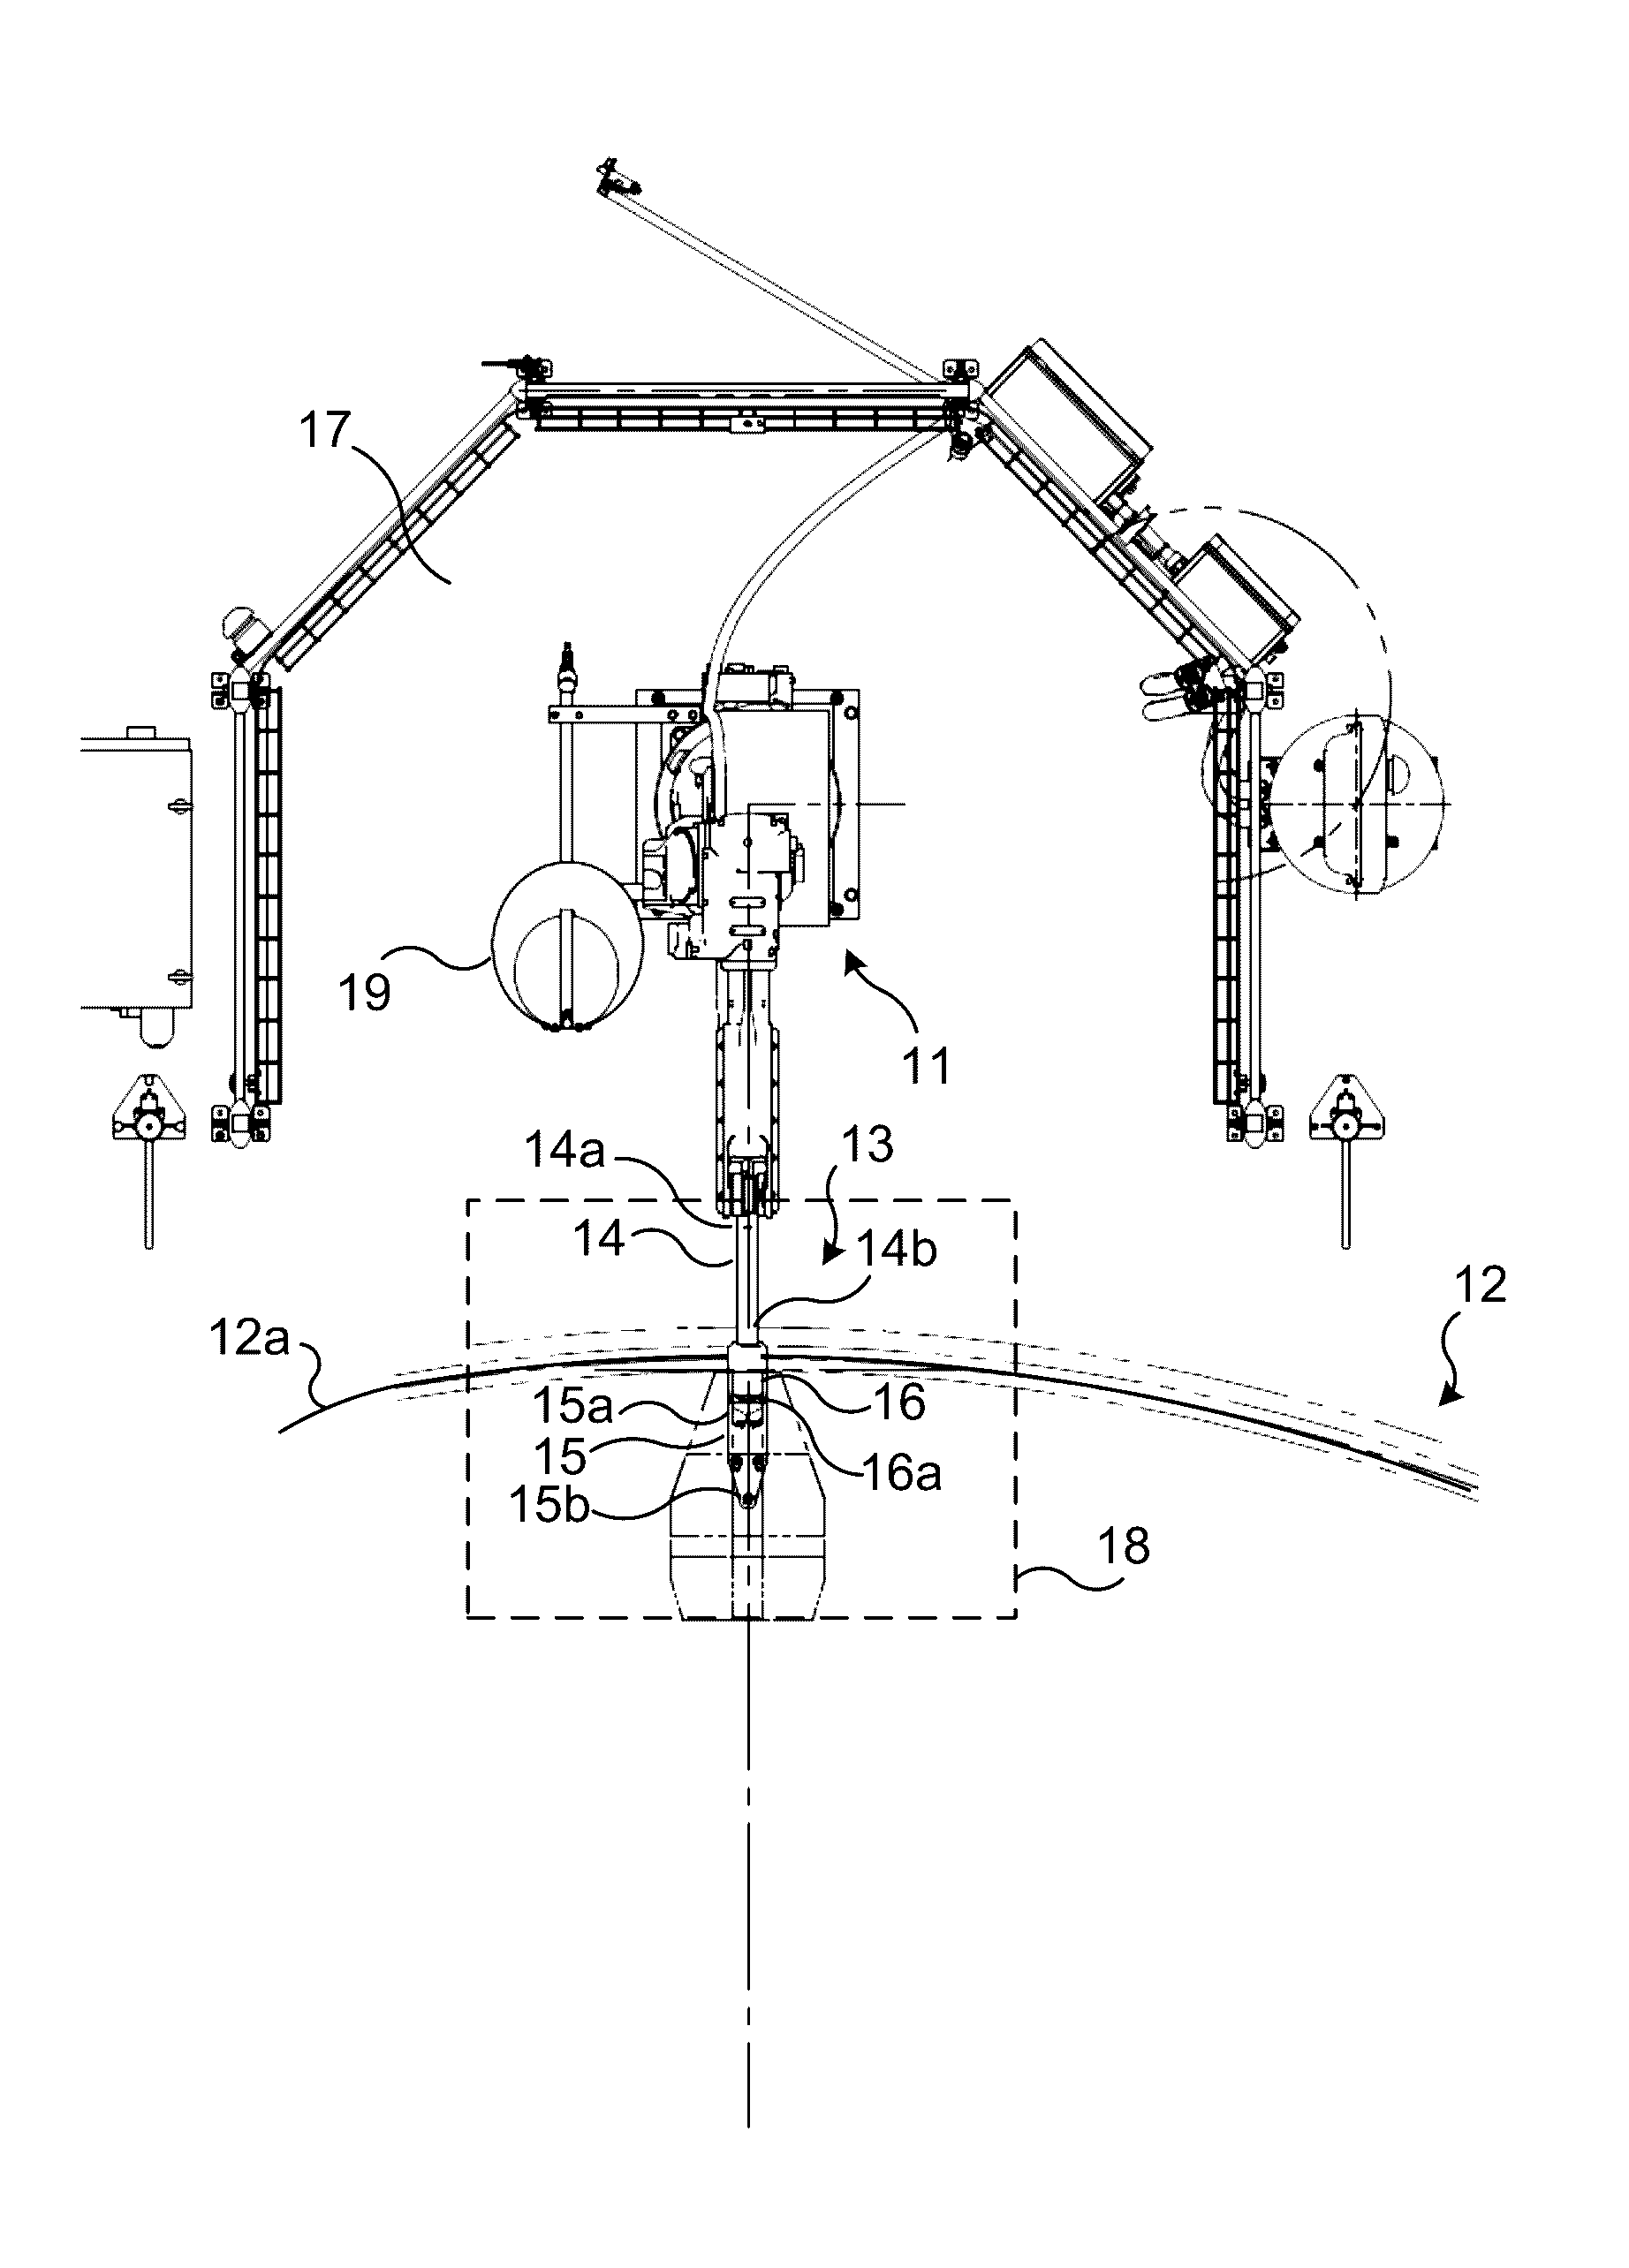 End effector, robot, and rotary milking system